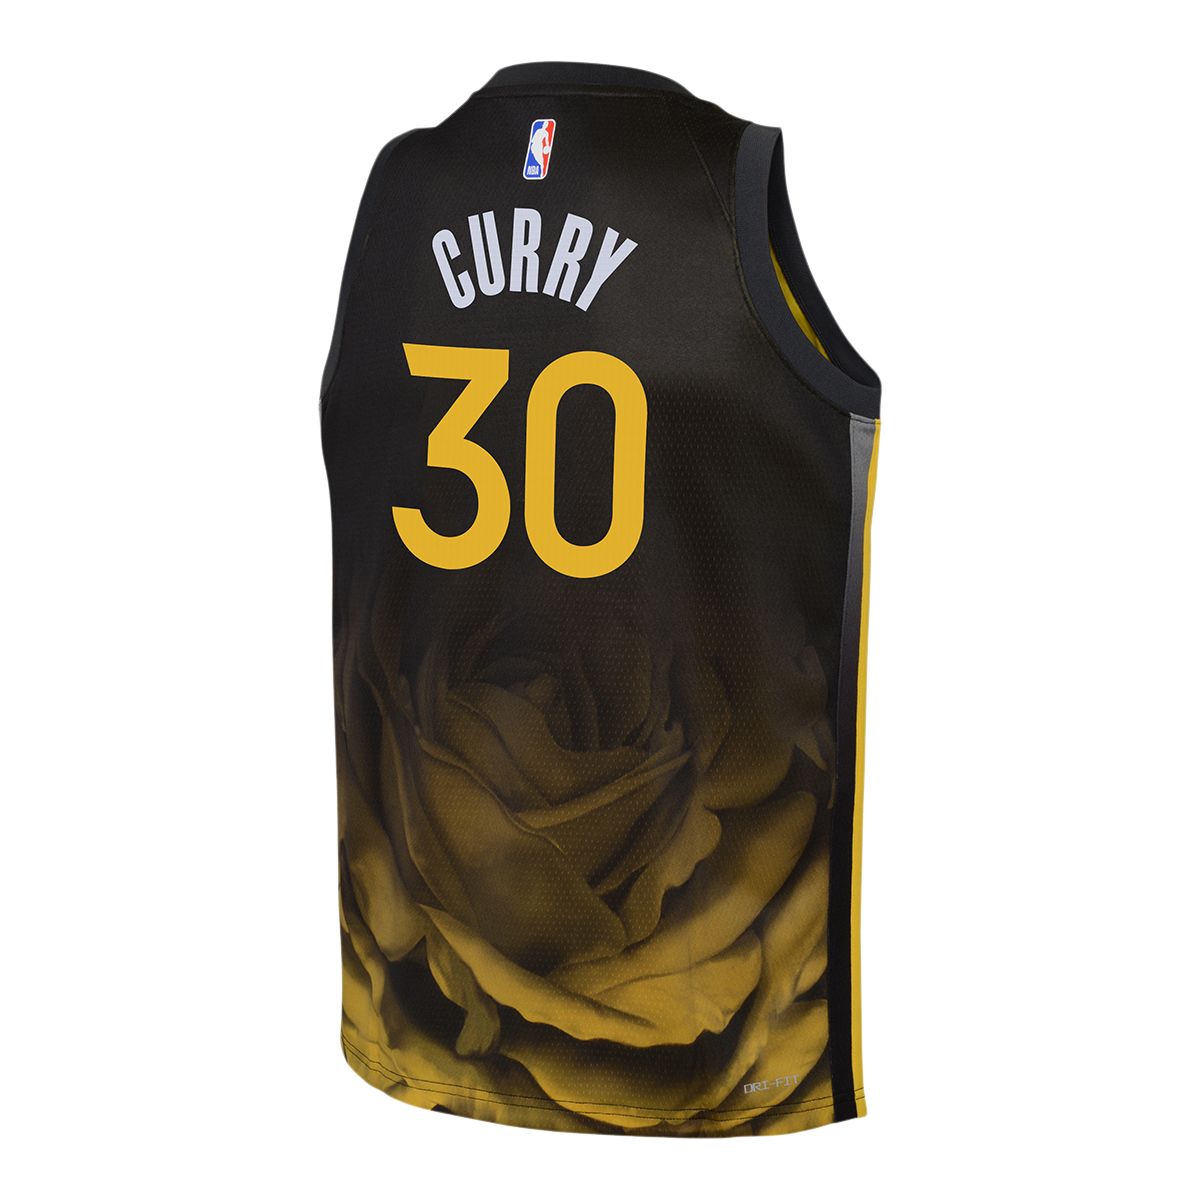 WARRIORS BABY JERSEY OUTFIT